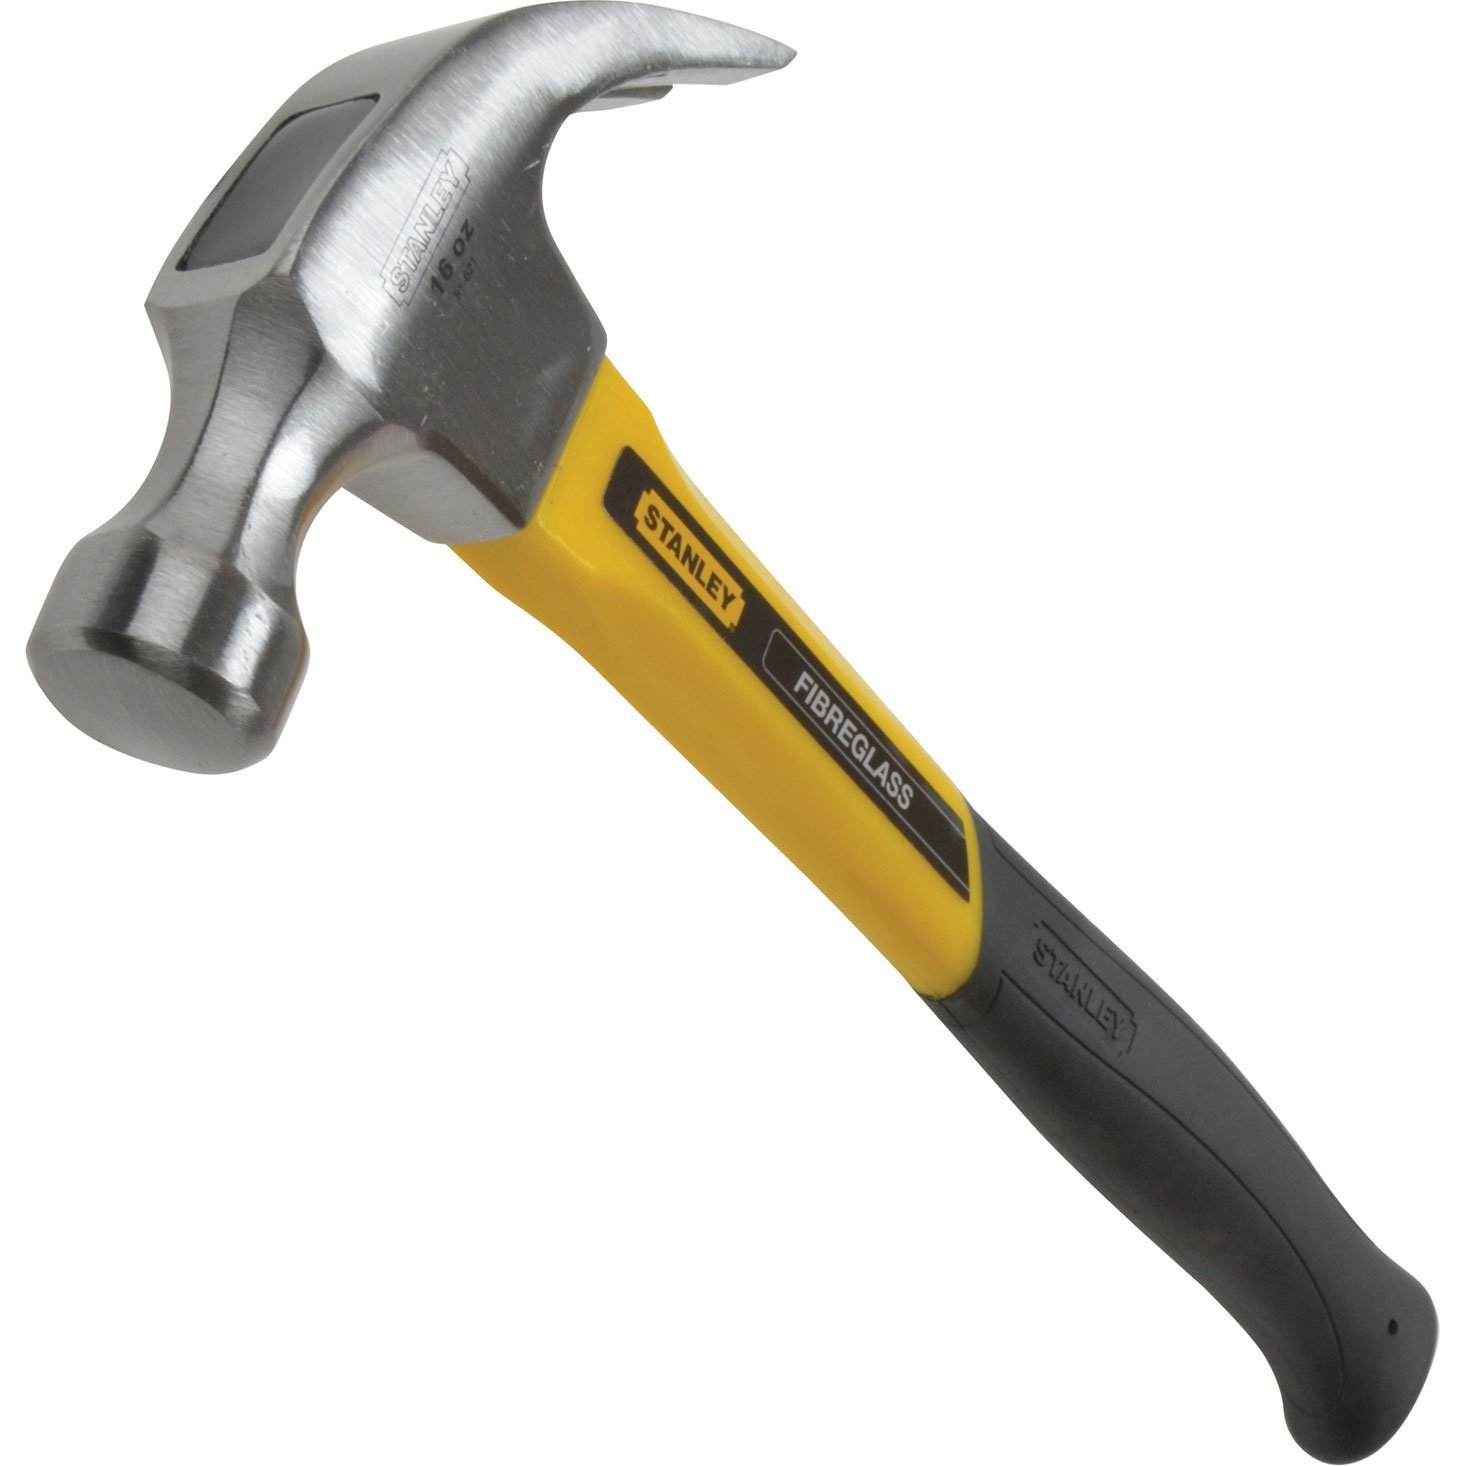 Stanley 151621 Fibreglass Curved Claw Hammer 16.Oz: Amazon.co.uk ...